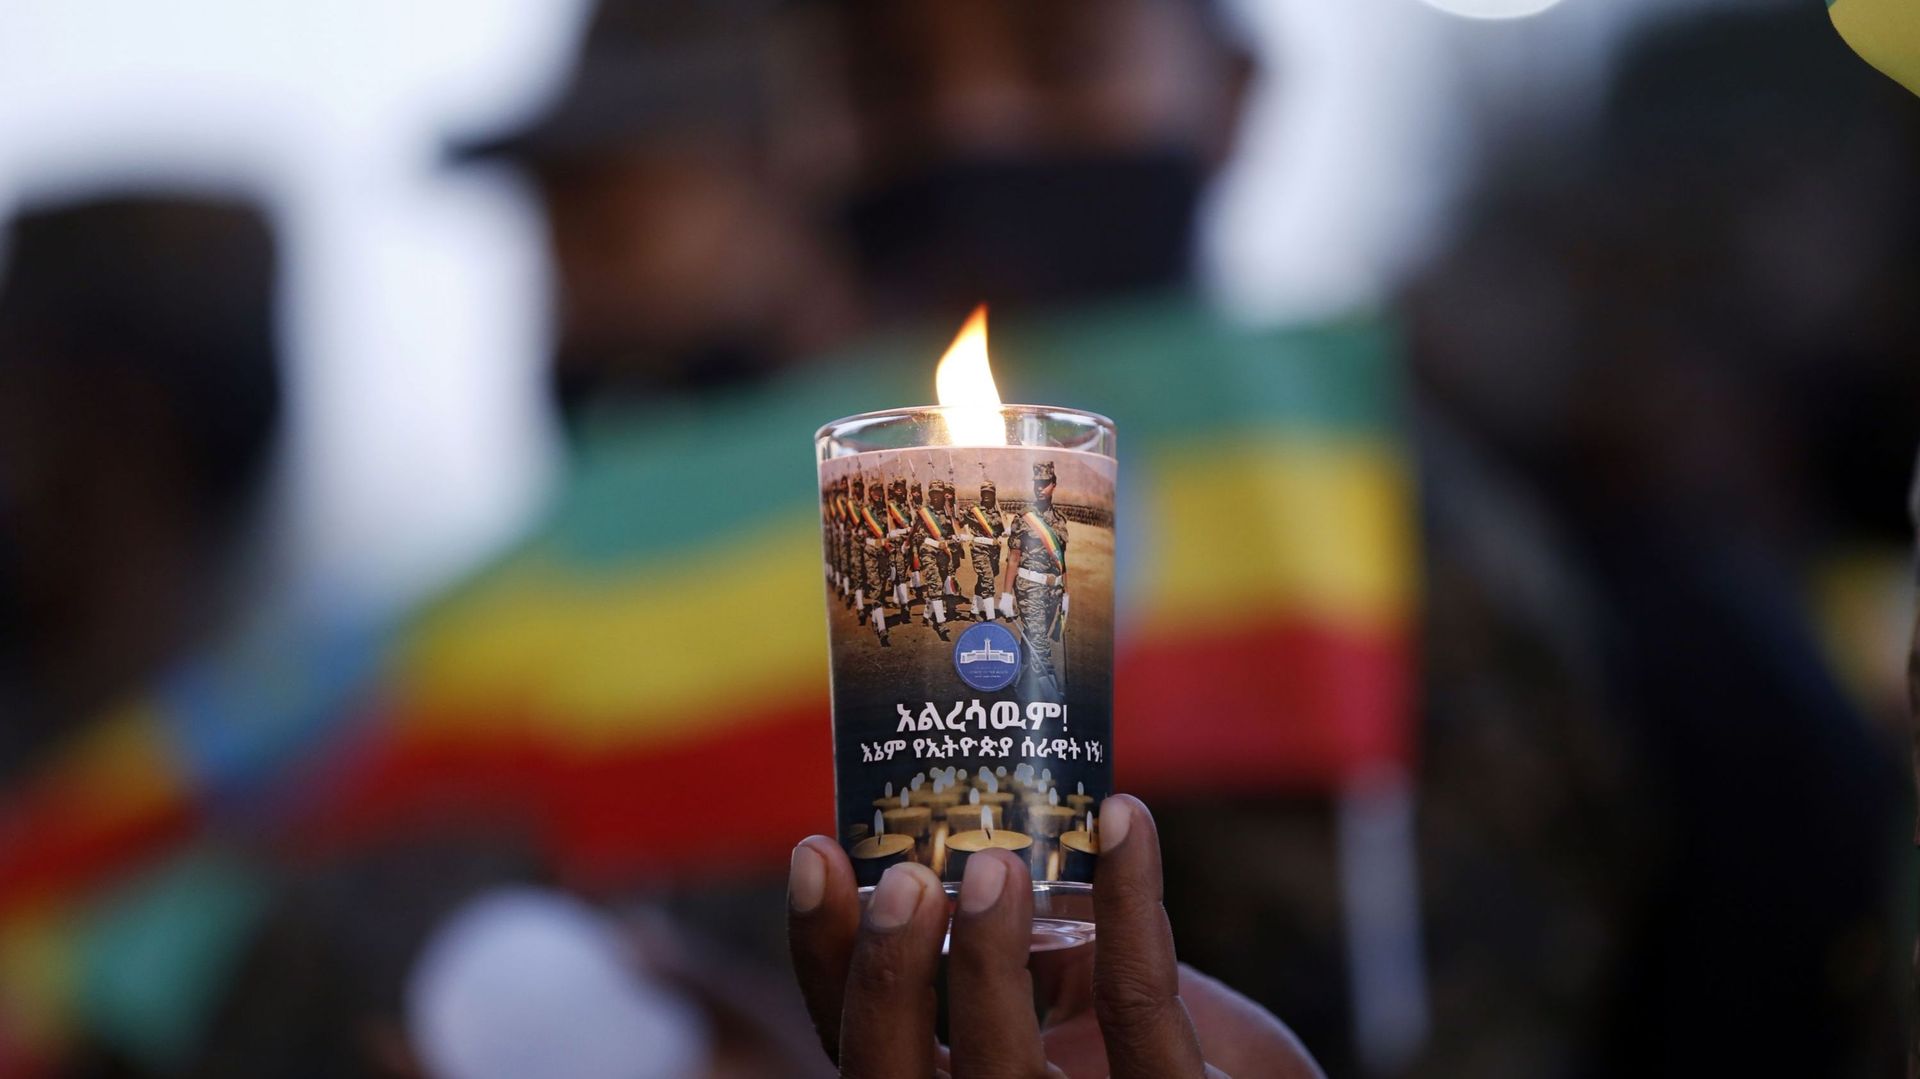 Memorial service for the victims of the Tigray conflict